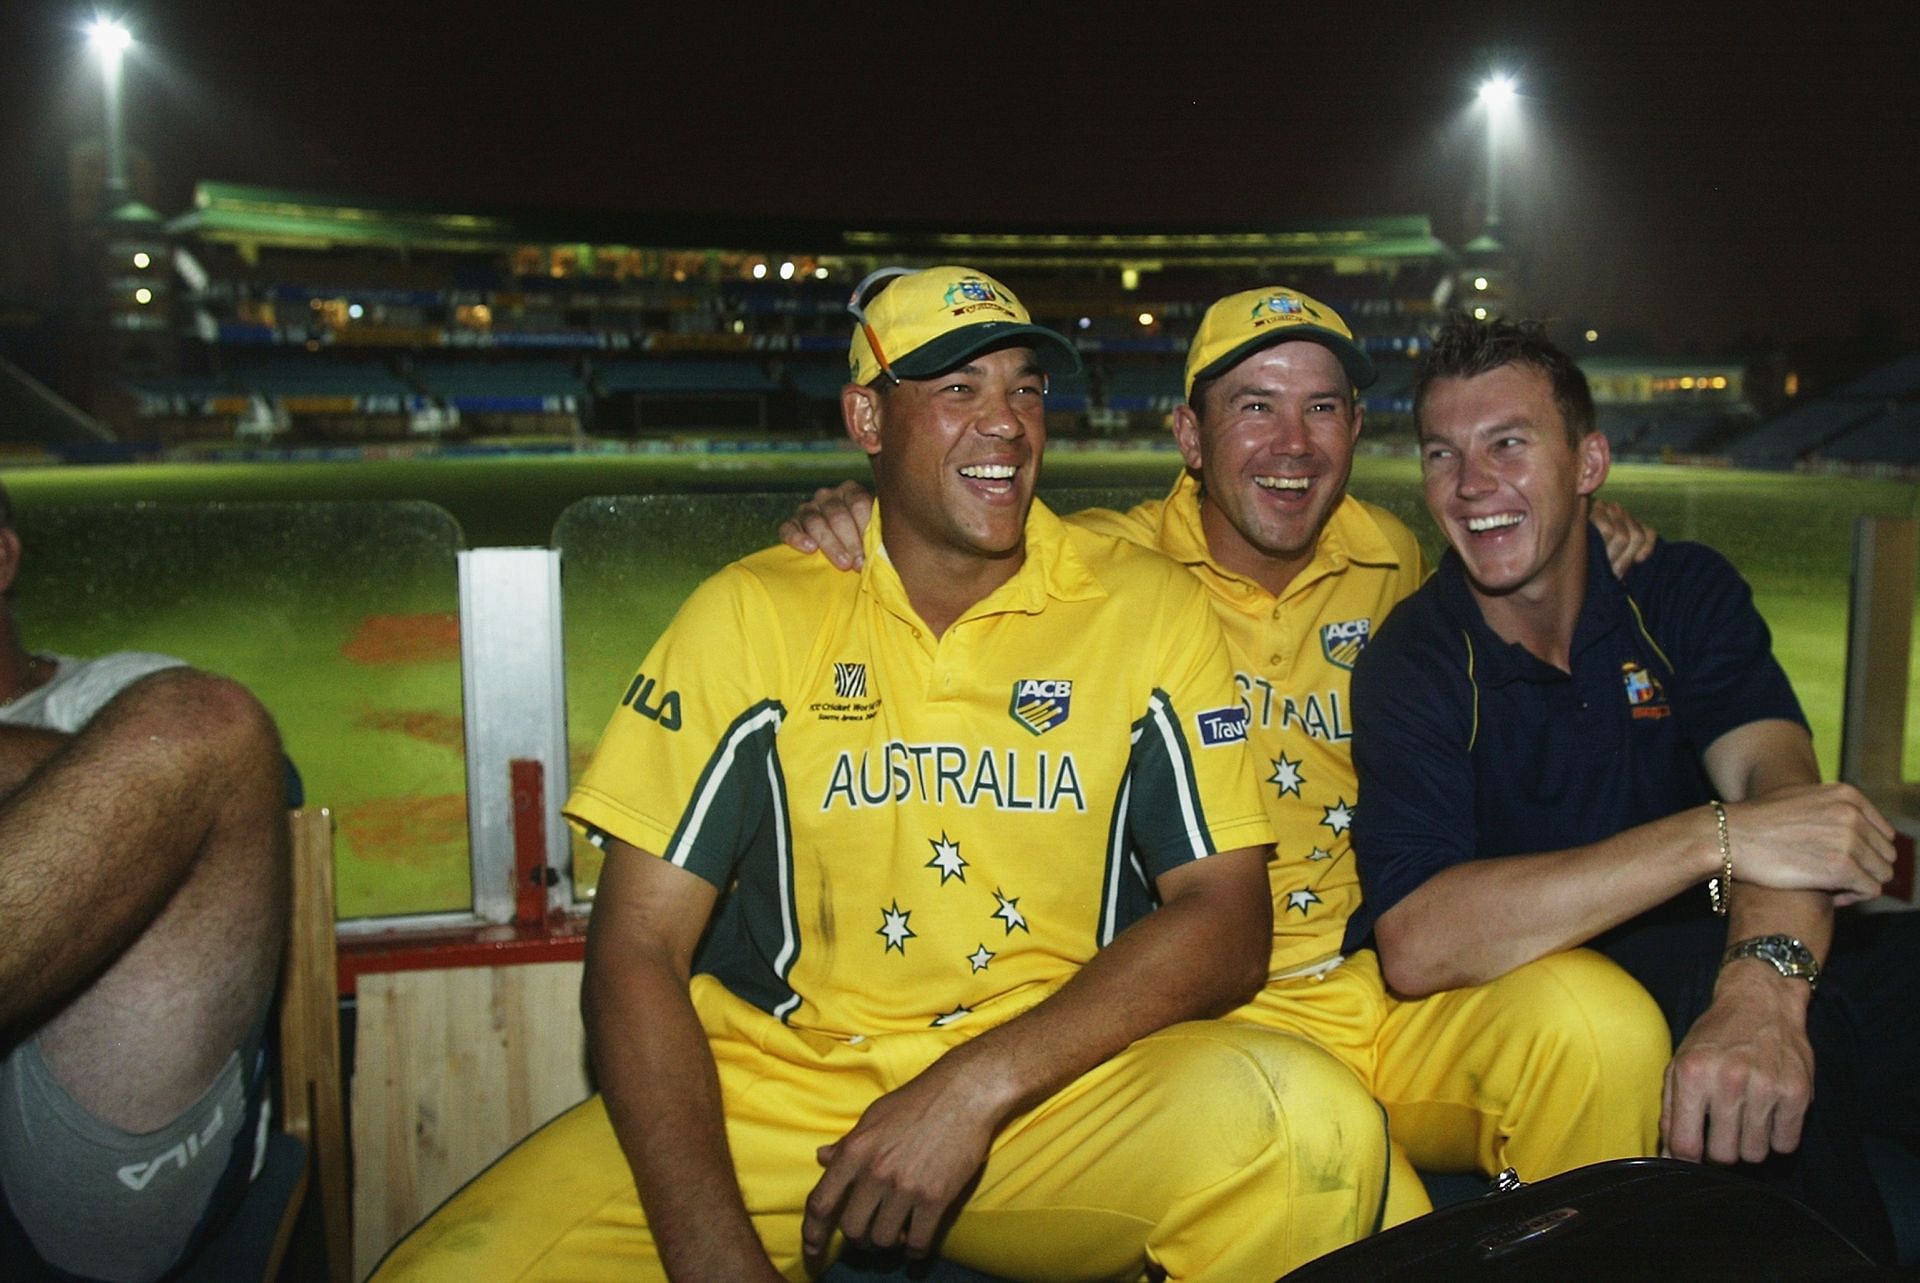 Andrew Symonds, Ricky Ponting and Brett Lee of Australia reflect on their win